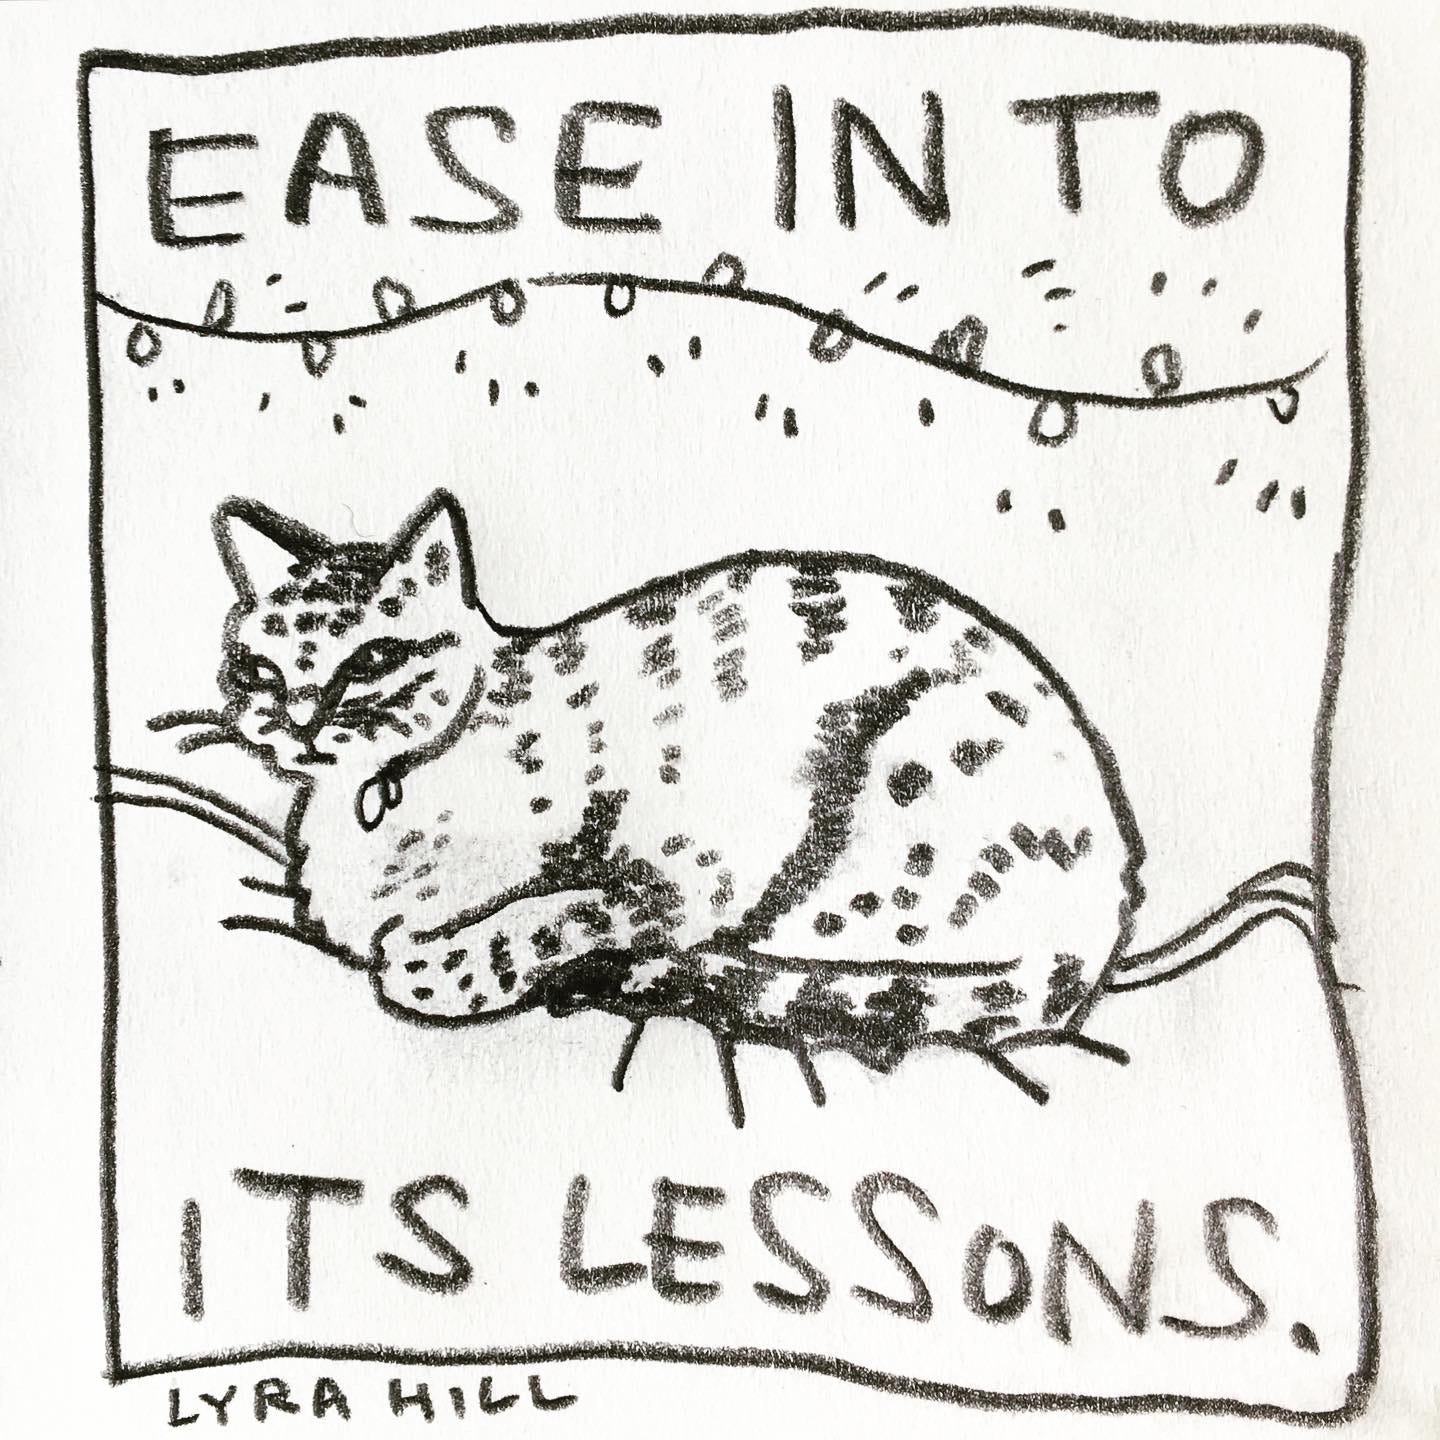 Panel 6: ease into its lessons. Image: the soft striped cat is curled in a ball looking at you. Christmas lights arc overhead.